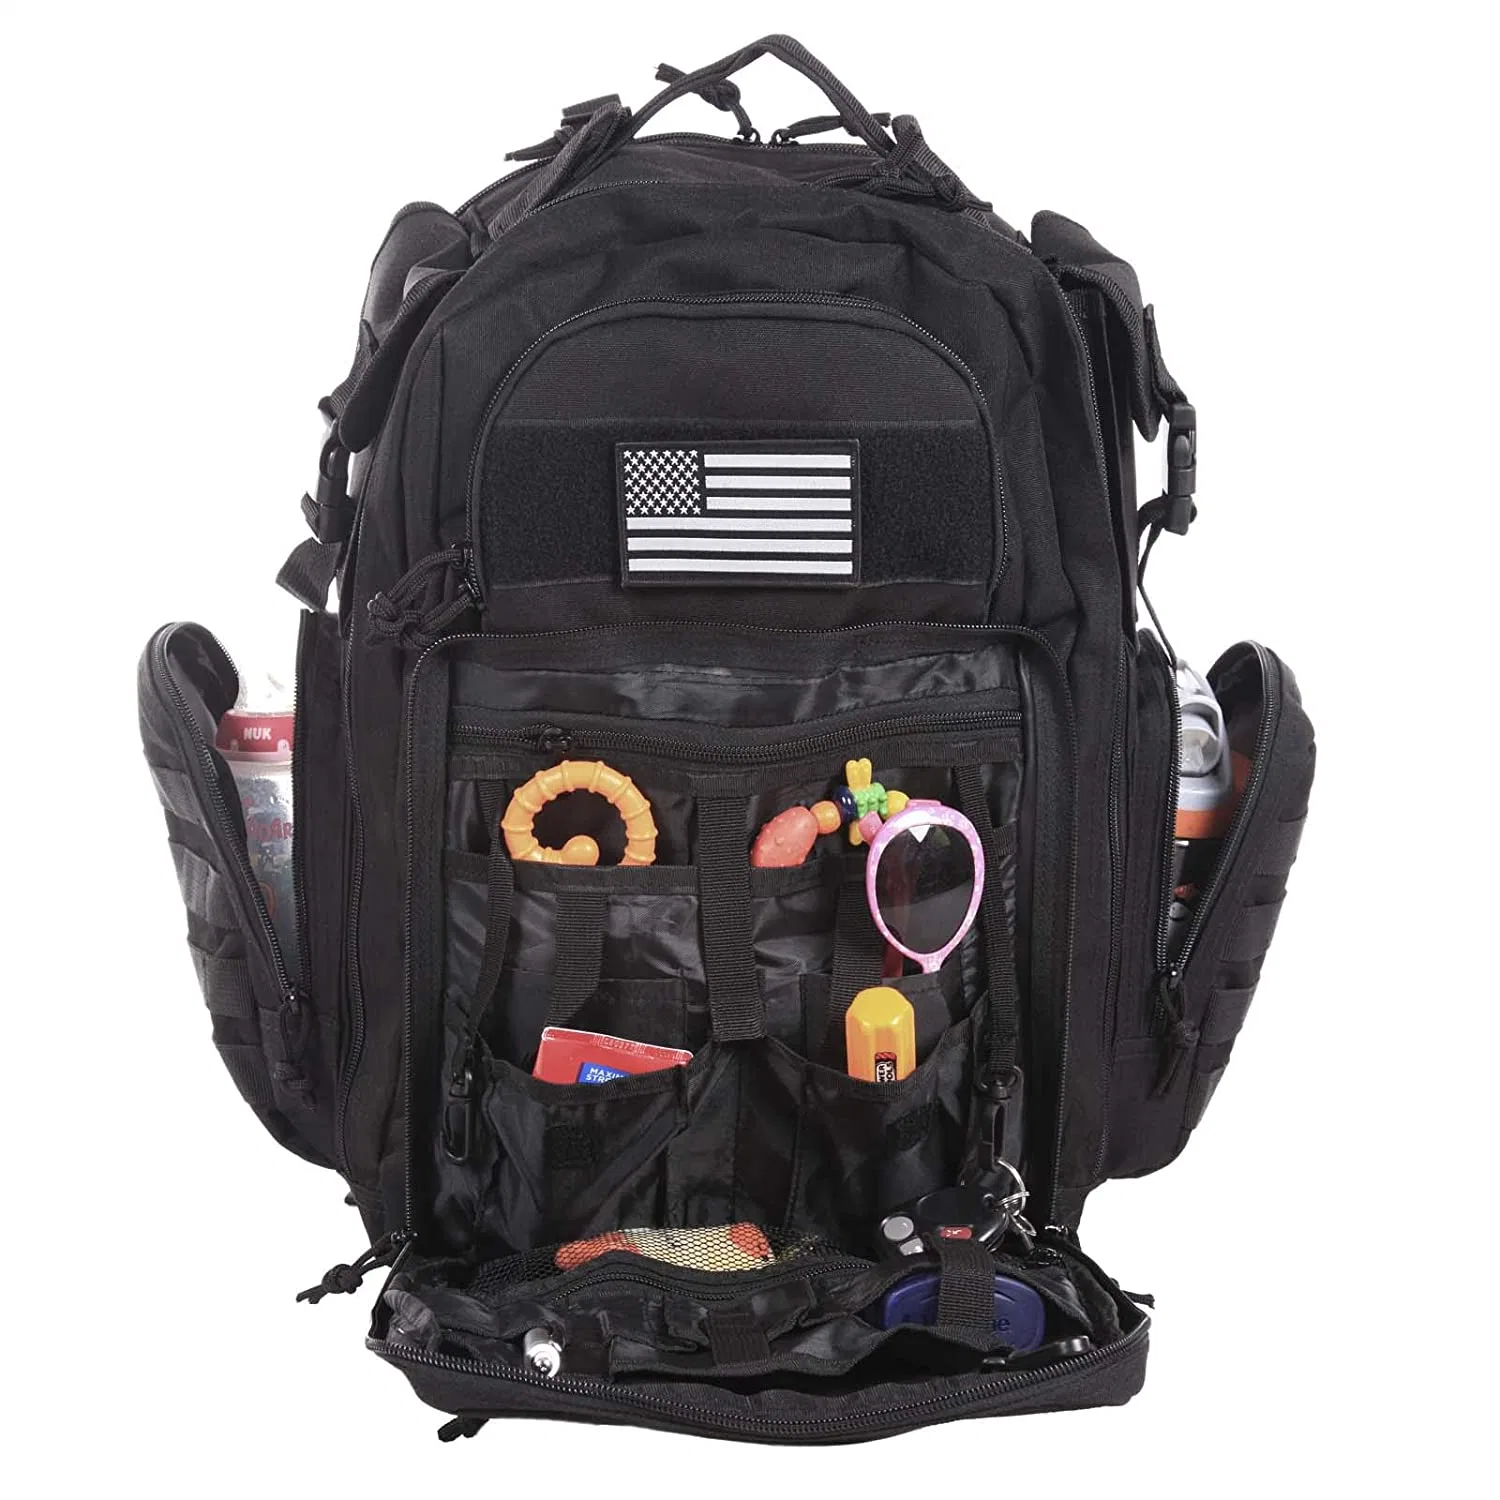 New Design High Quality Diaper Bag with Tactical Style Dad Bag Gear Changing Pad Dad Diaper Bag